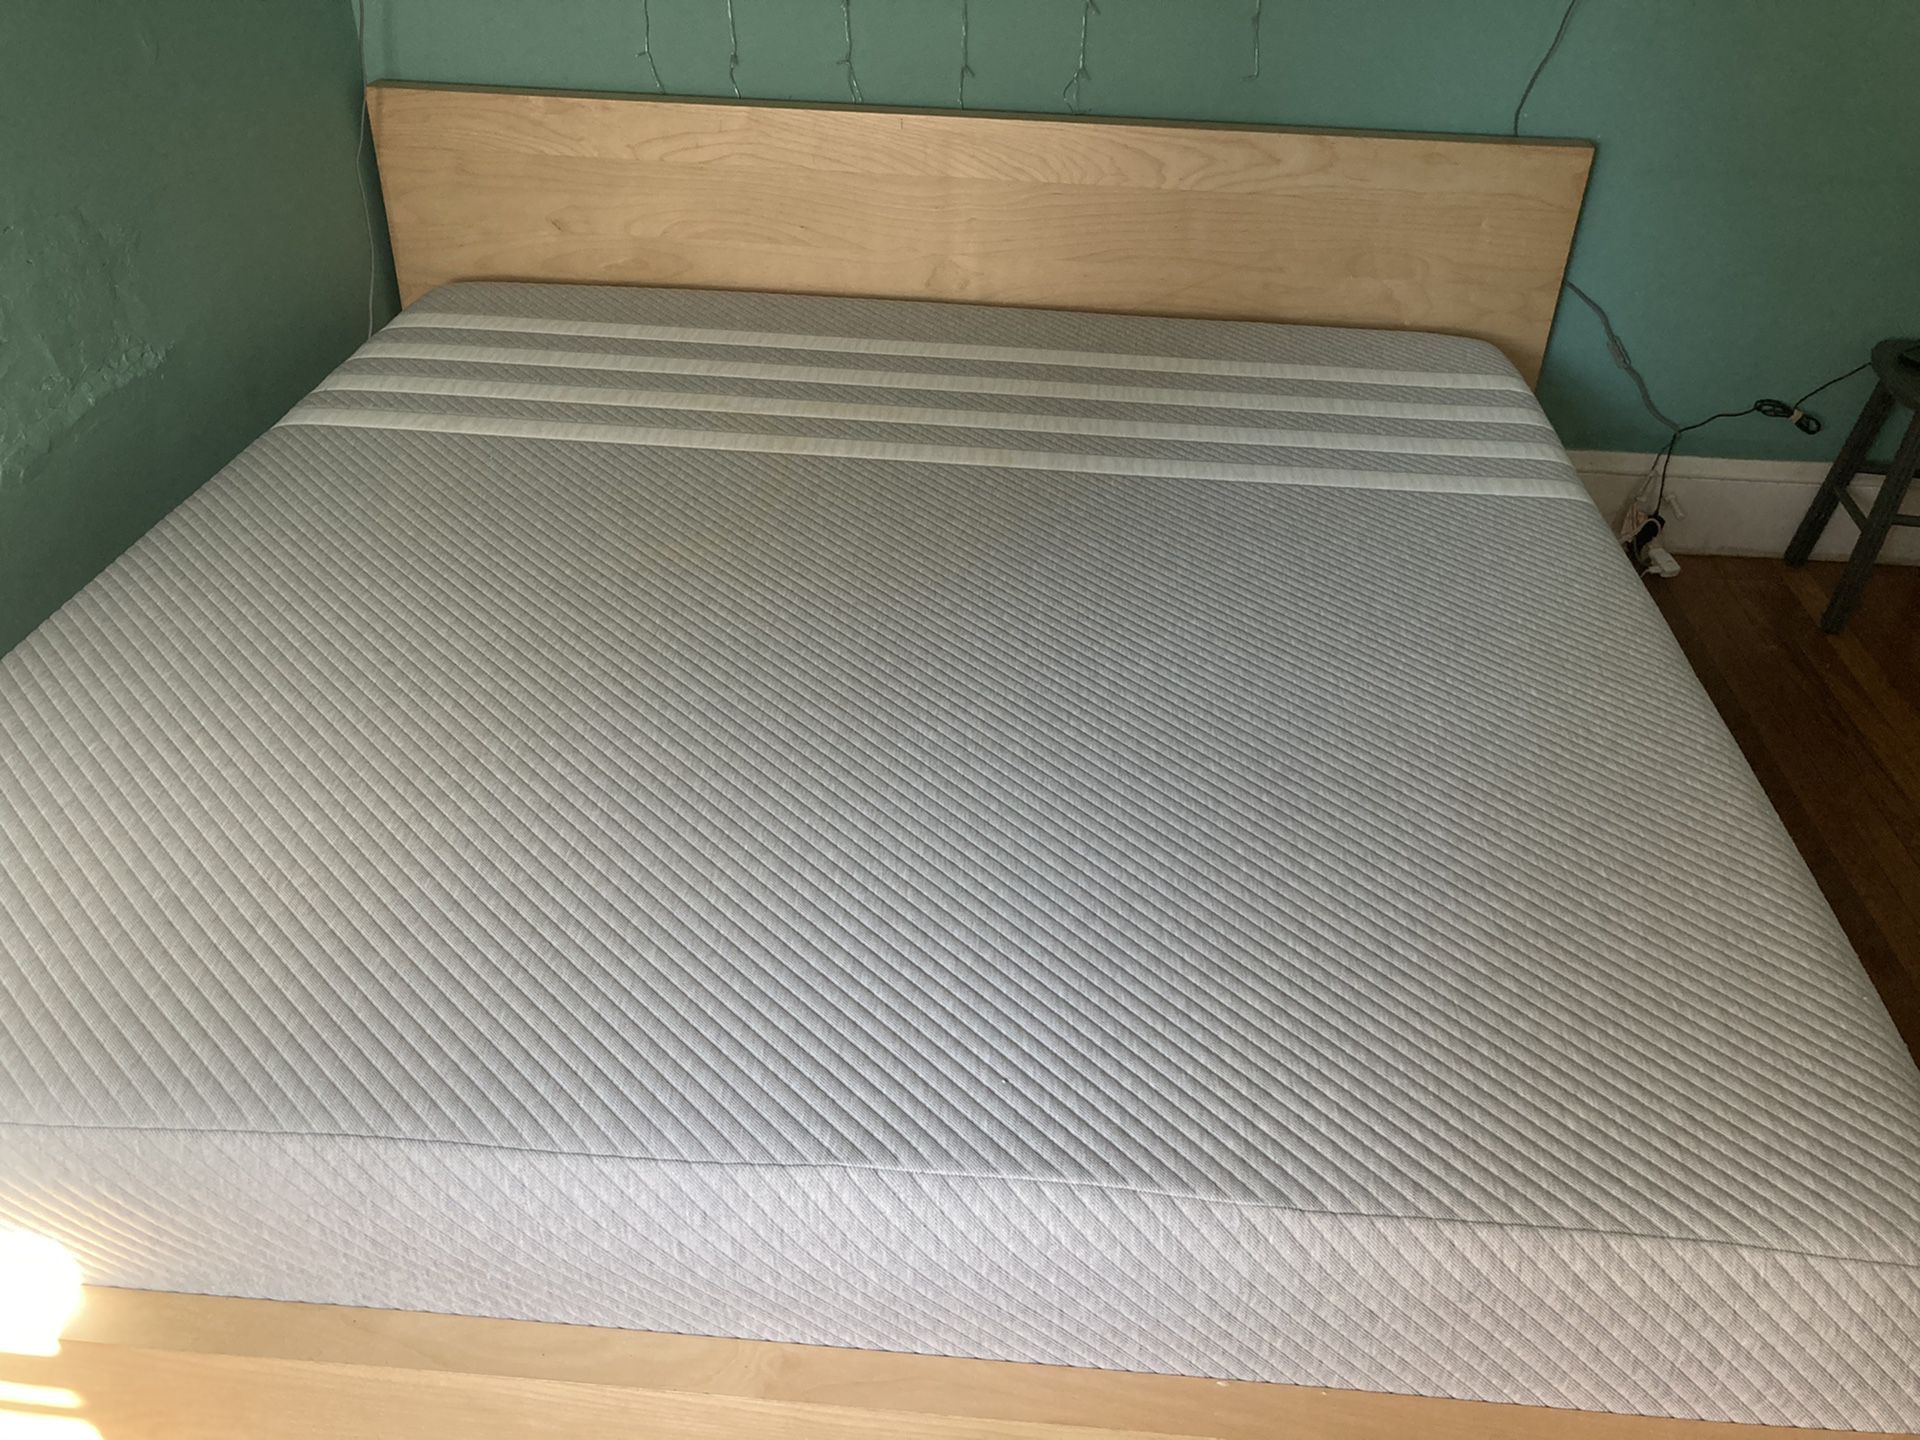 IKEA Malm king size - can deliver